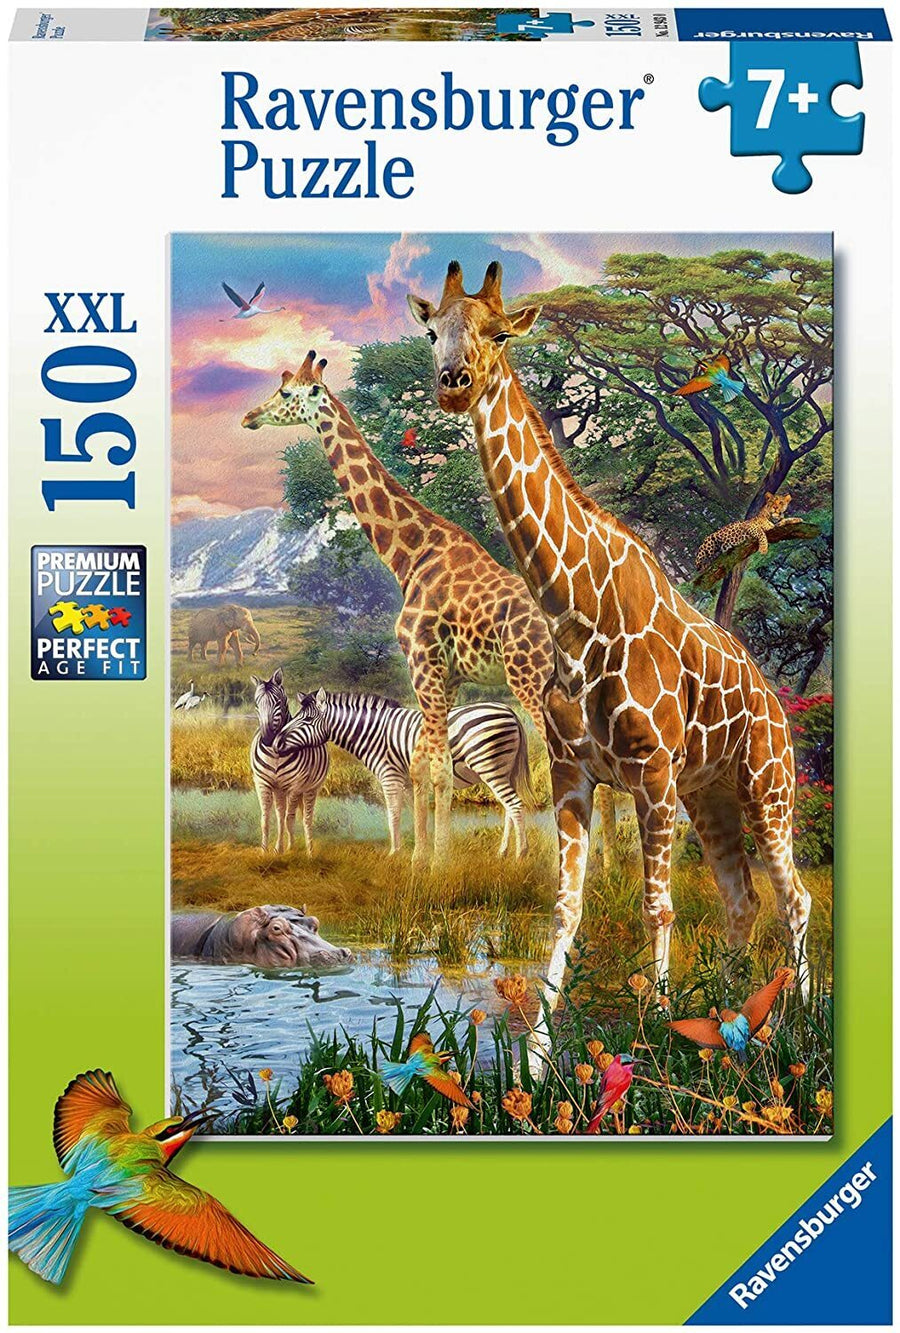 Ravensburger Giraffes in Africa Puzzle 150 pieces